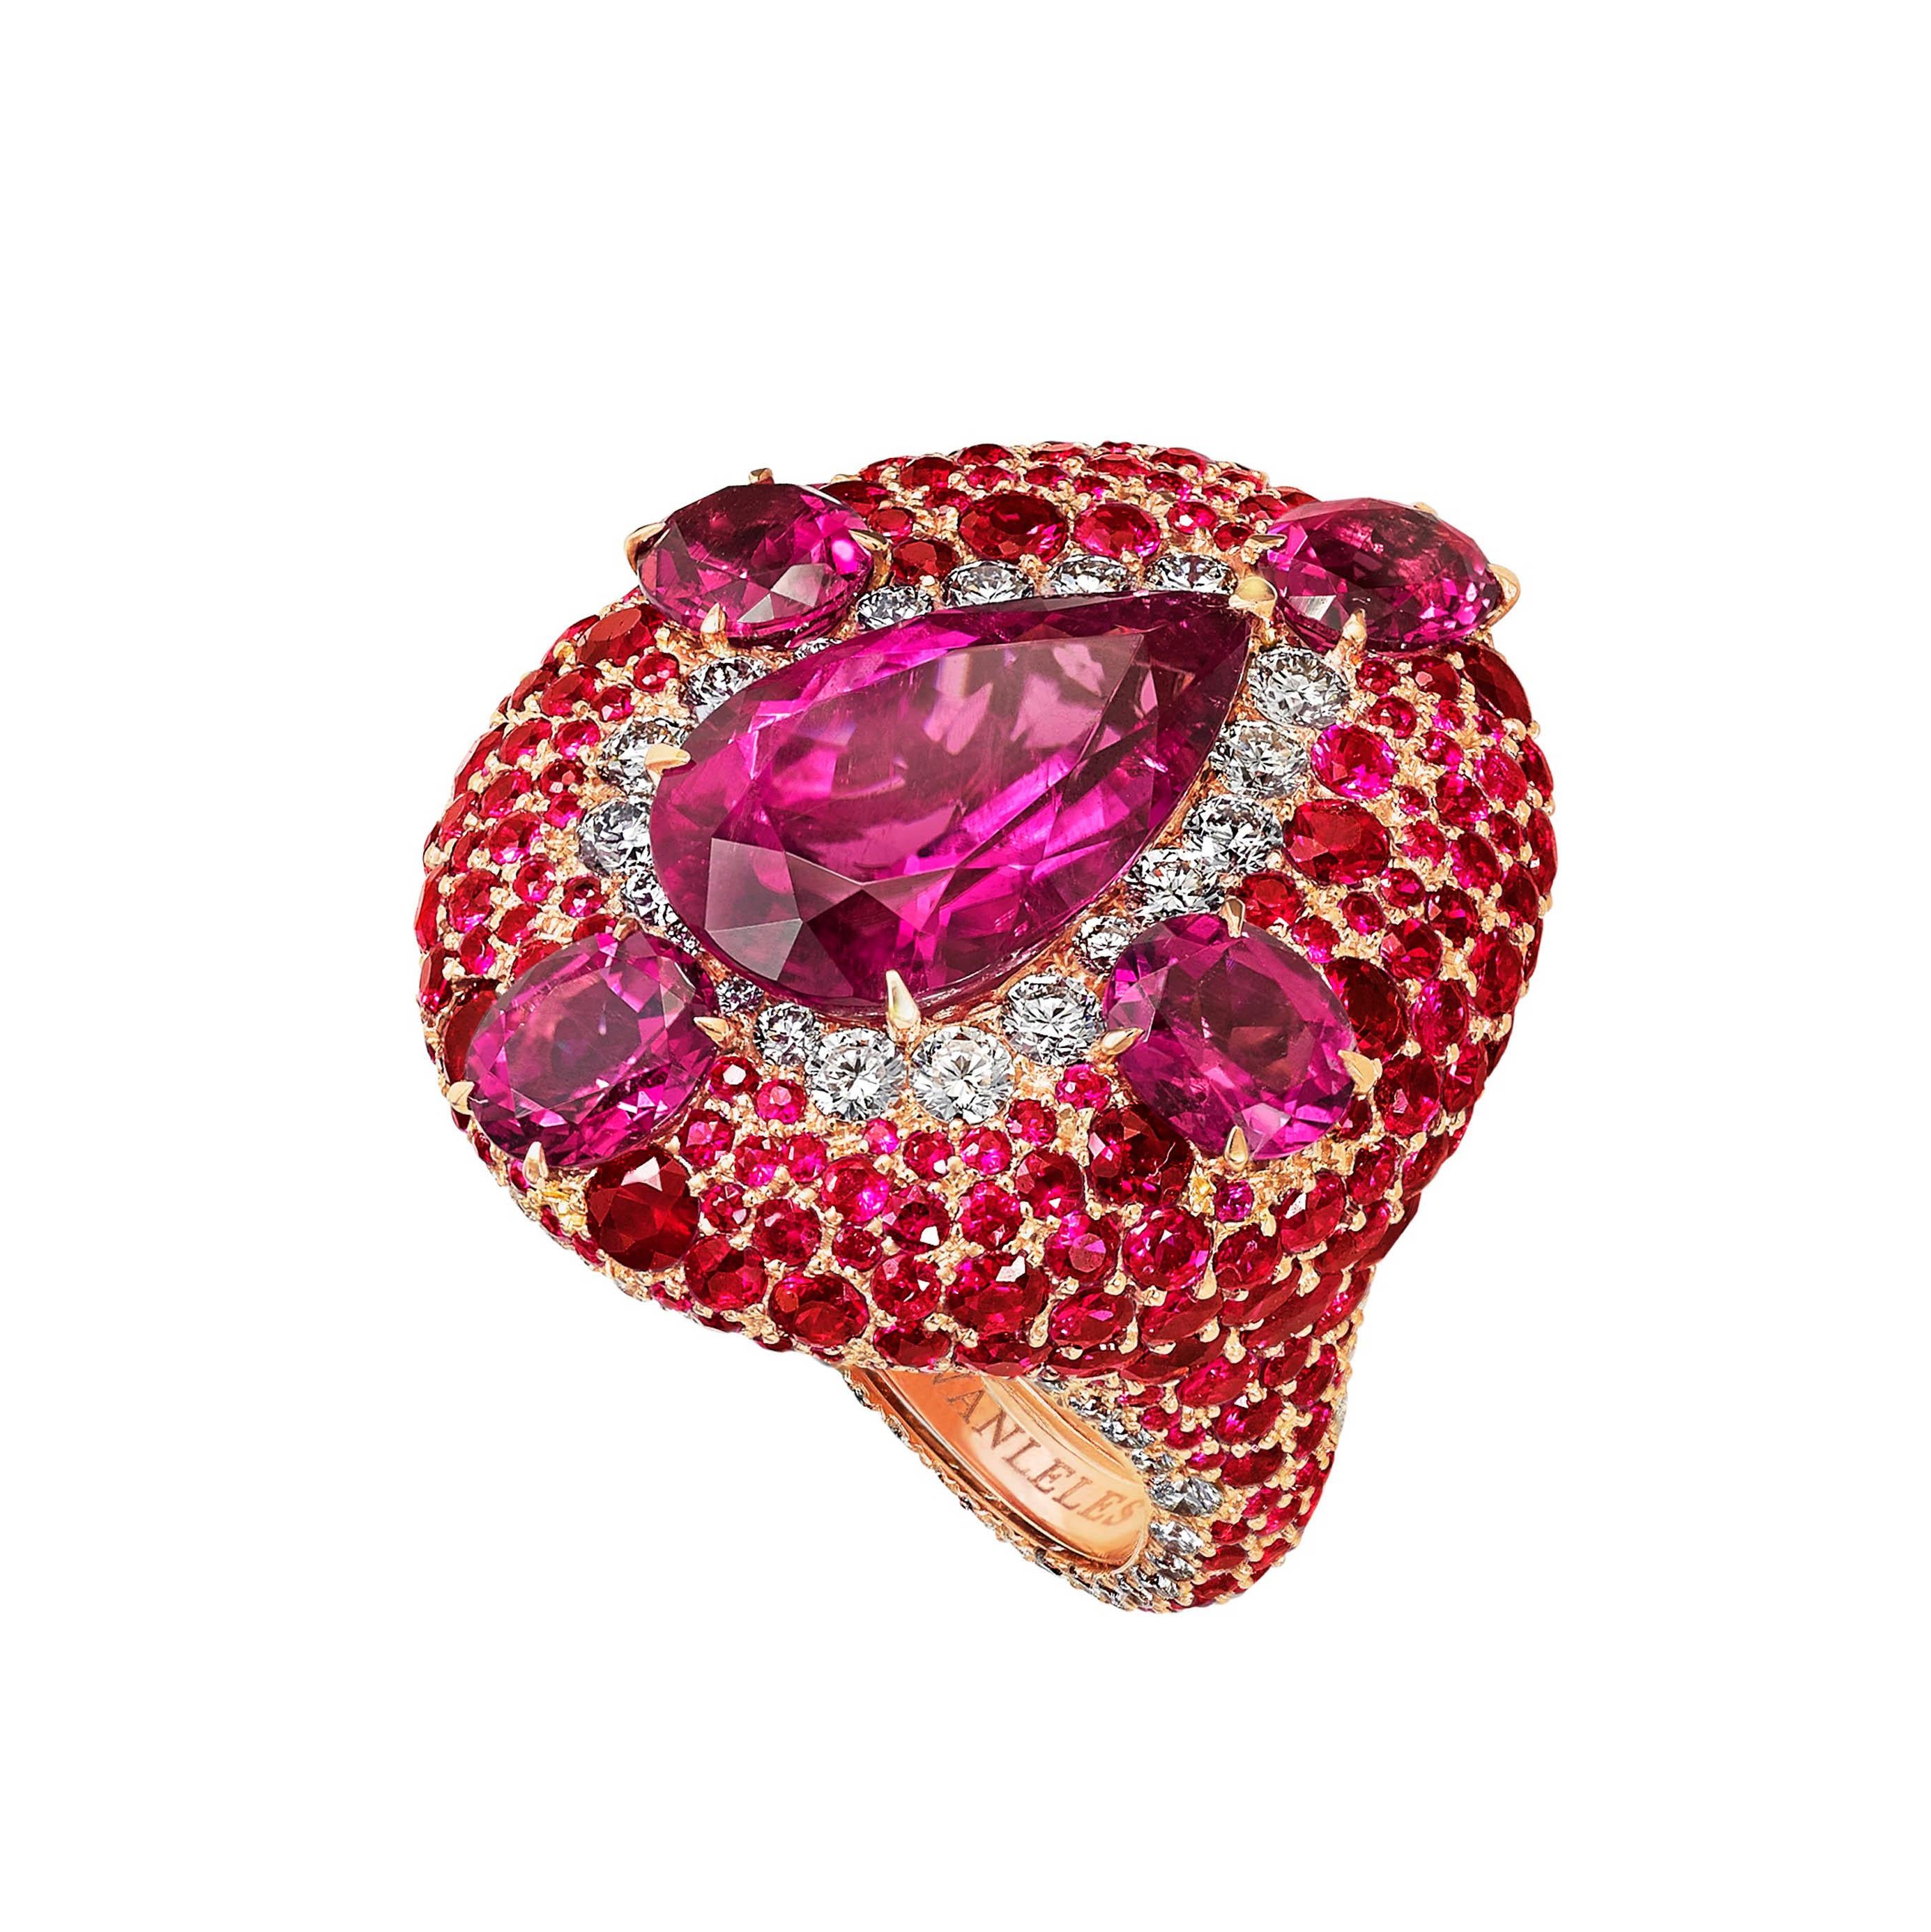 Women's 18 Karat Rose Gold, White Diamonds, Rubies and Rubellite Cocktail Ring For Sale